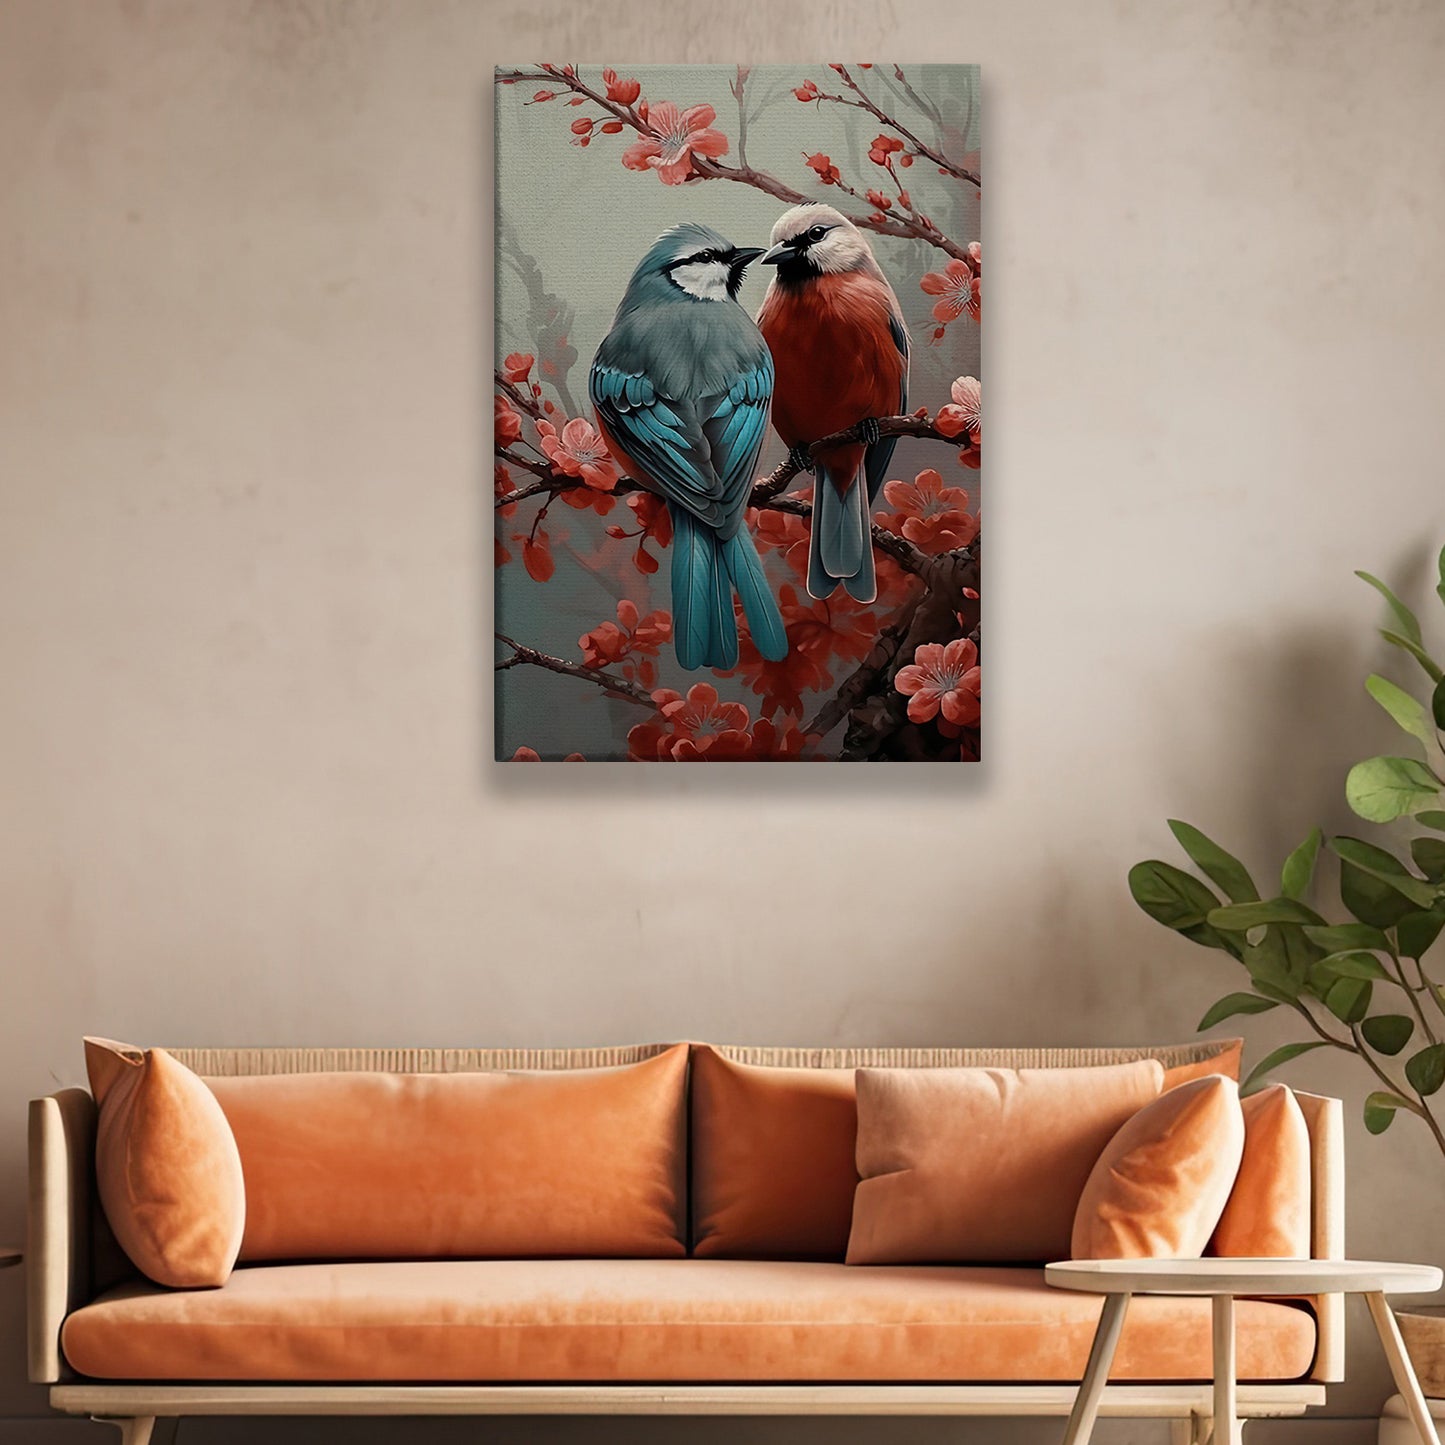 Couple Blue And Red Cardinal On The Tree, Cardinal Bird Canvas Painting, Wall Art Decor - Poster Gift For Bird Lovers